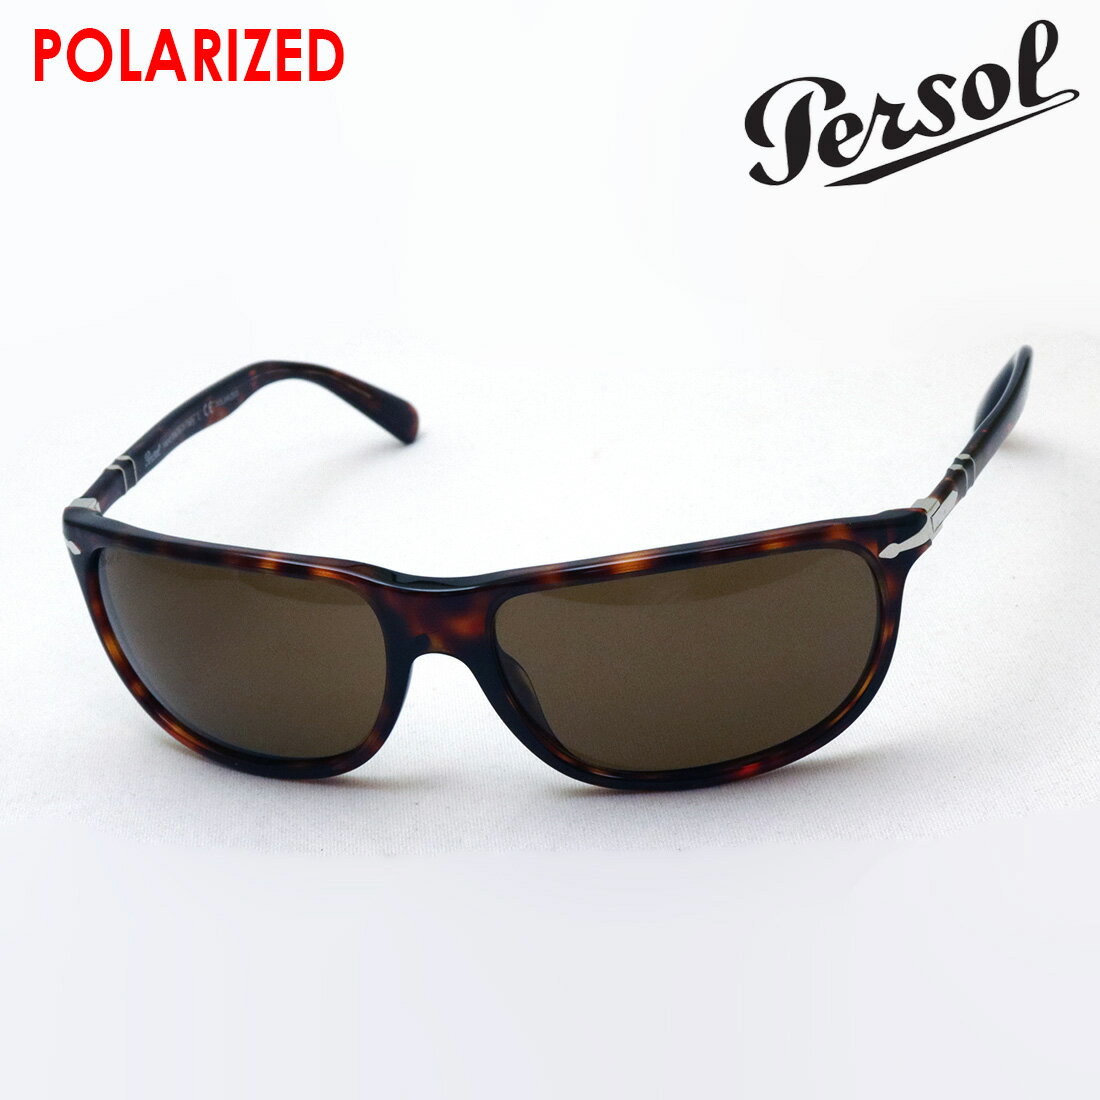 ץߥλǥ ڥڥ륽 󥰥饹 ŹPERSOL и󥰥饹 PO3222S 2457  Made In Italy  ȡ